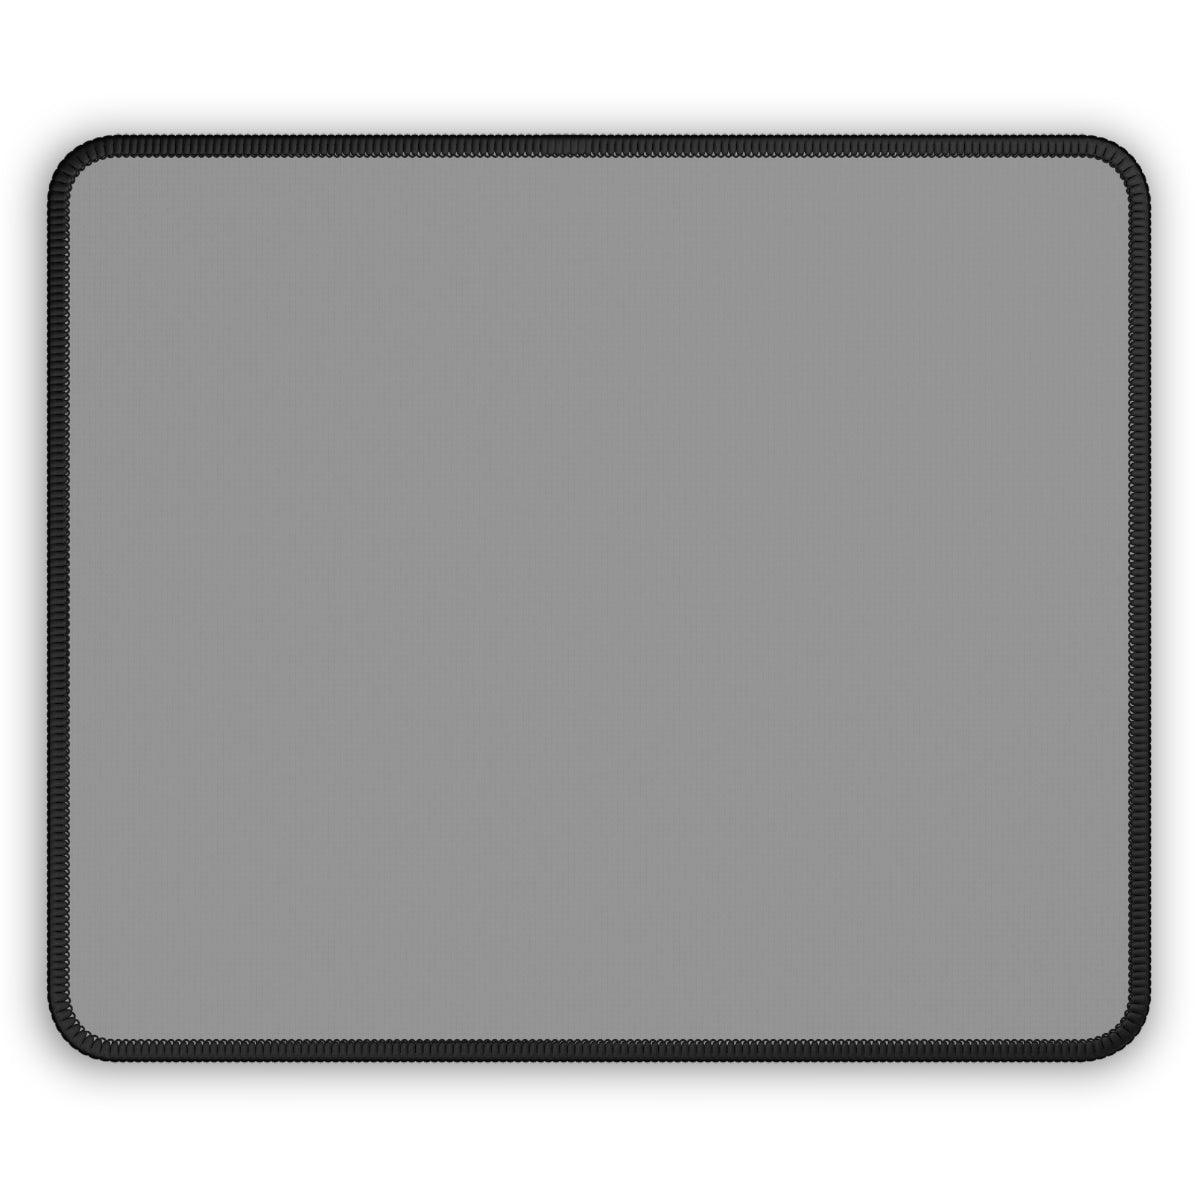 Gray Gaming Mouse Pad - Desk Cookies